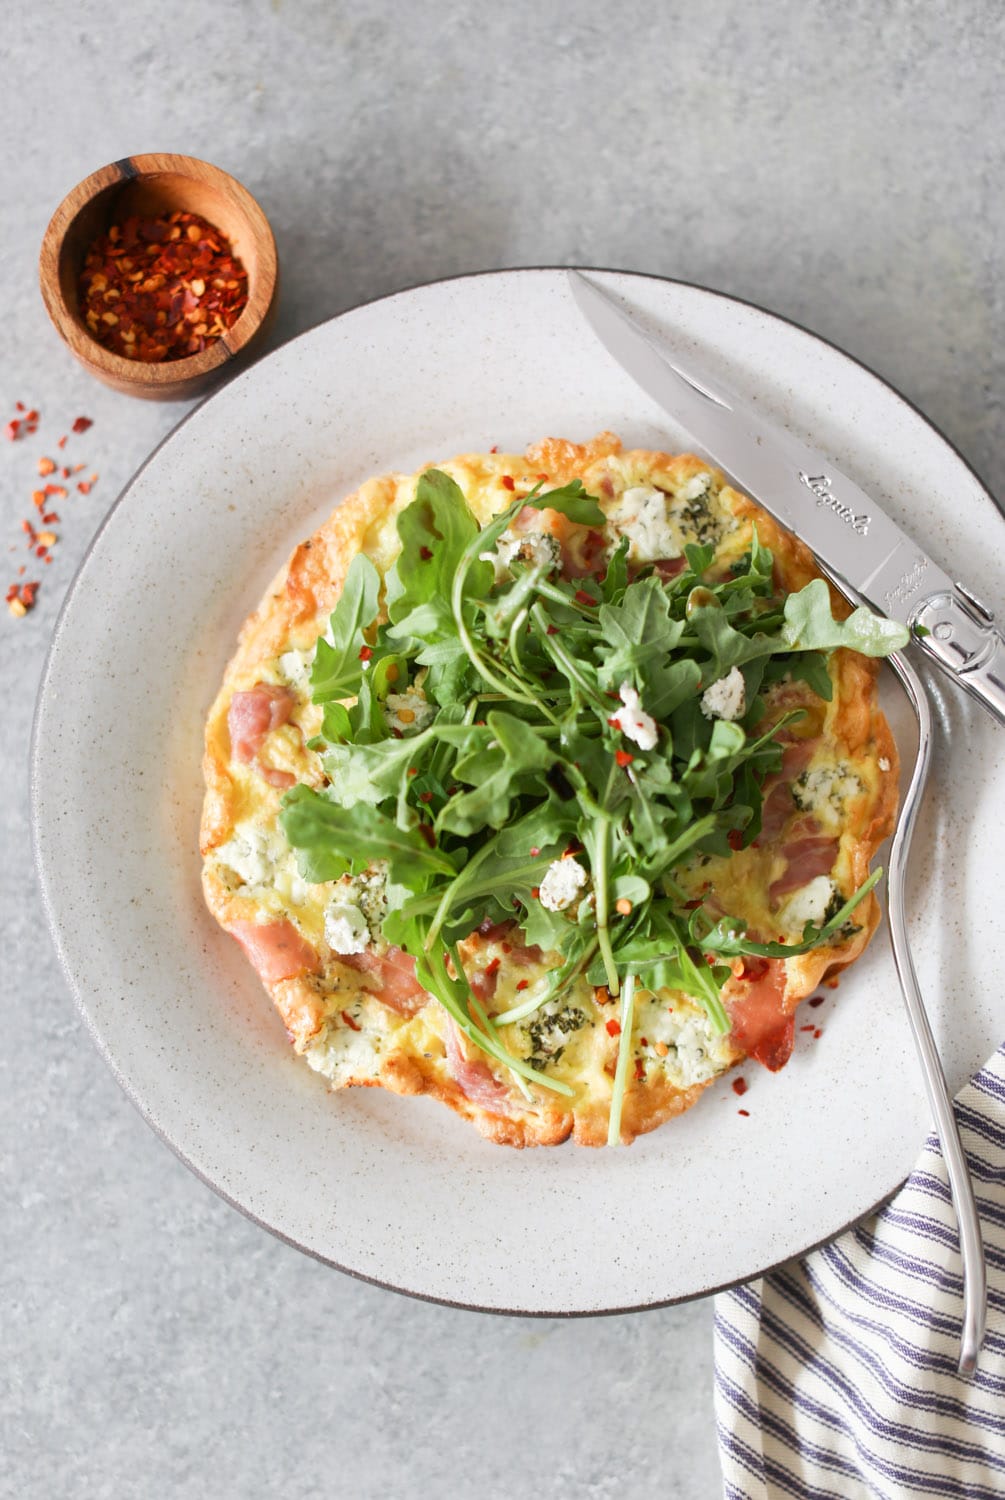 Personal Frittata with Prosciutto, Goat Cheese, and Arugula